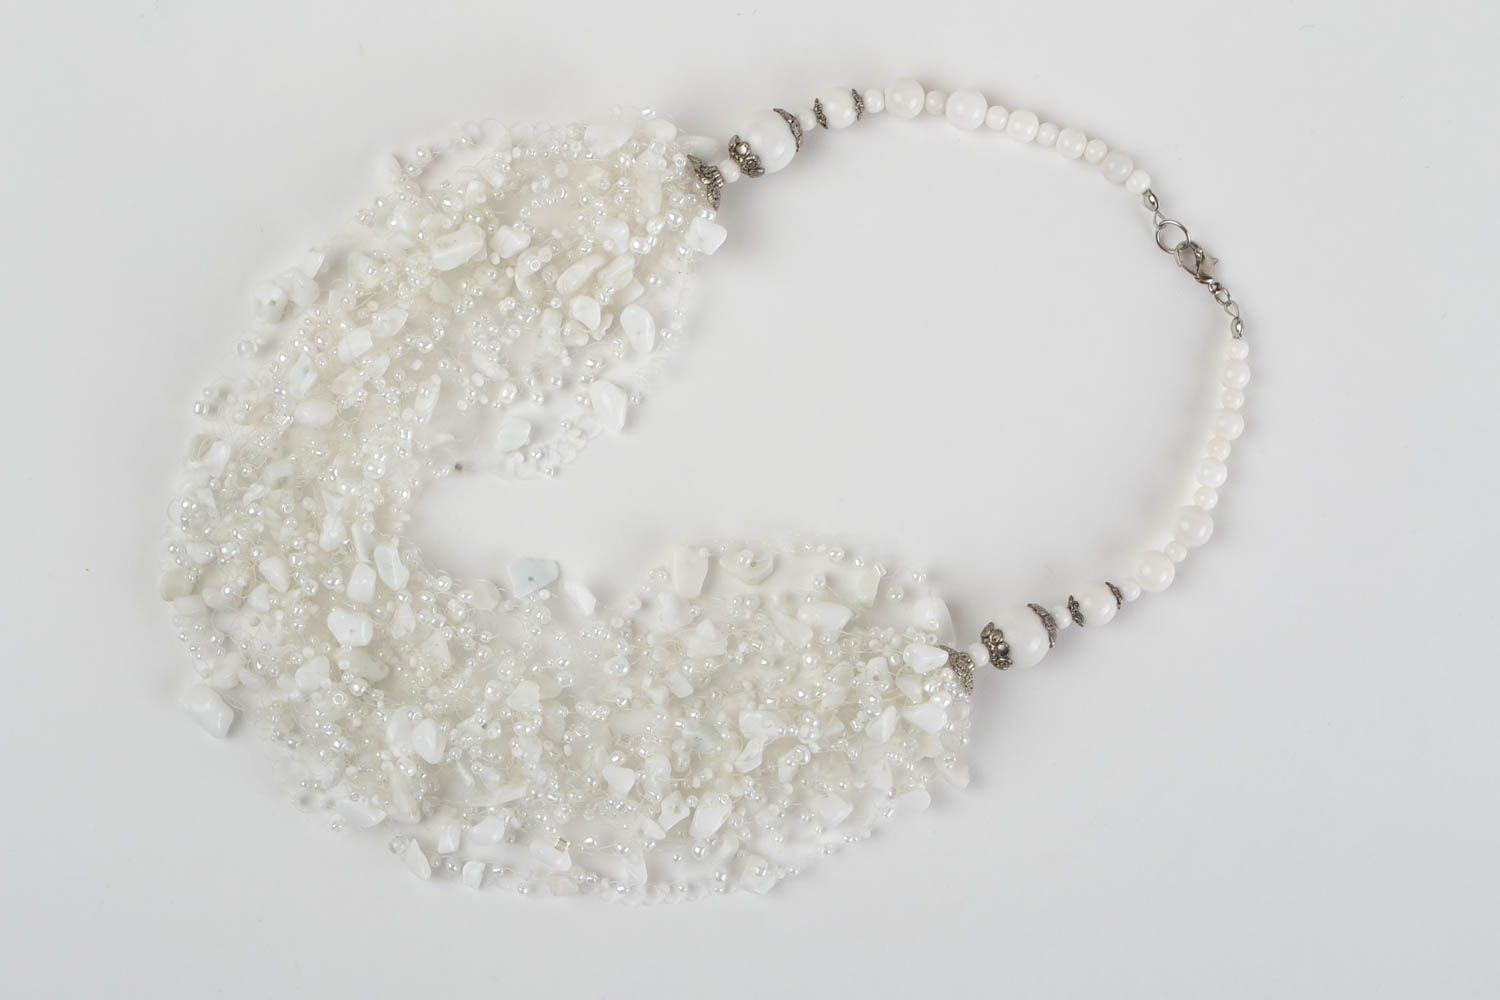 Handmade cute light airy white necklace made of beads and natural stones photo 5